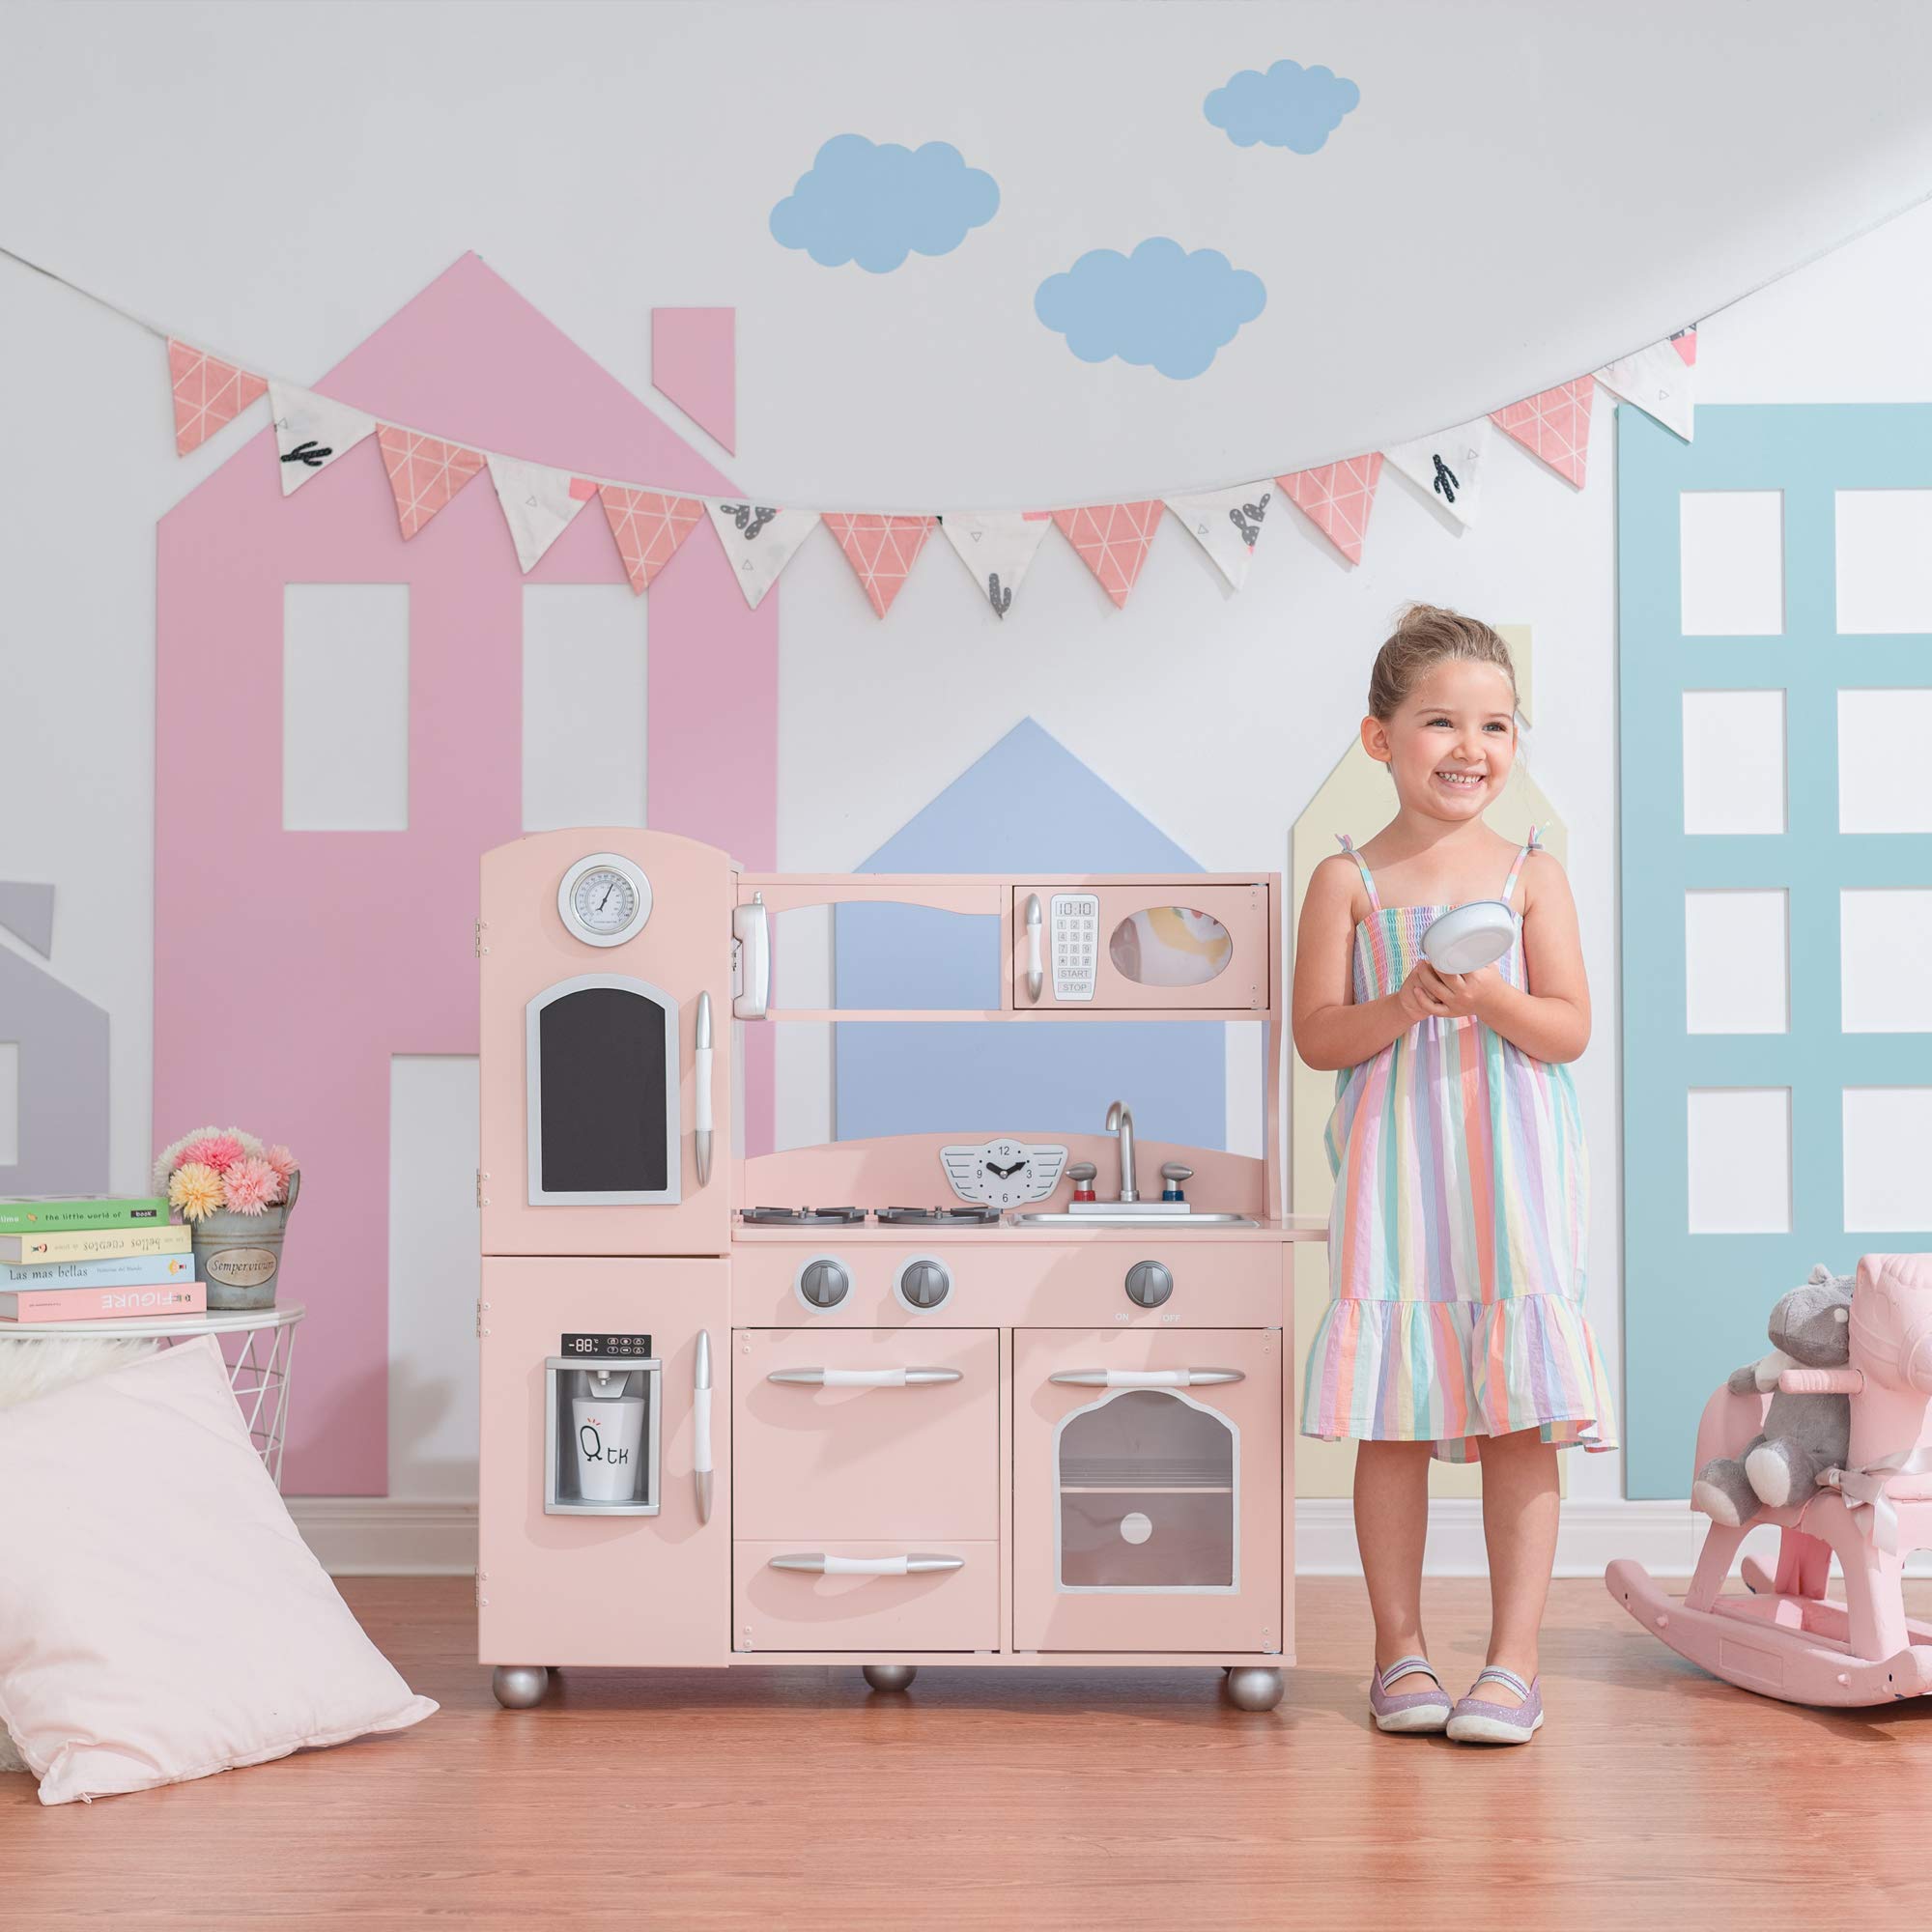 Teamson Kids - Retro Play Kitchen with Refrigerator. Freezer. Oven and Dishwasher - Pink (1 Pcs)